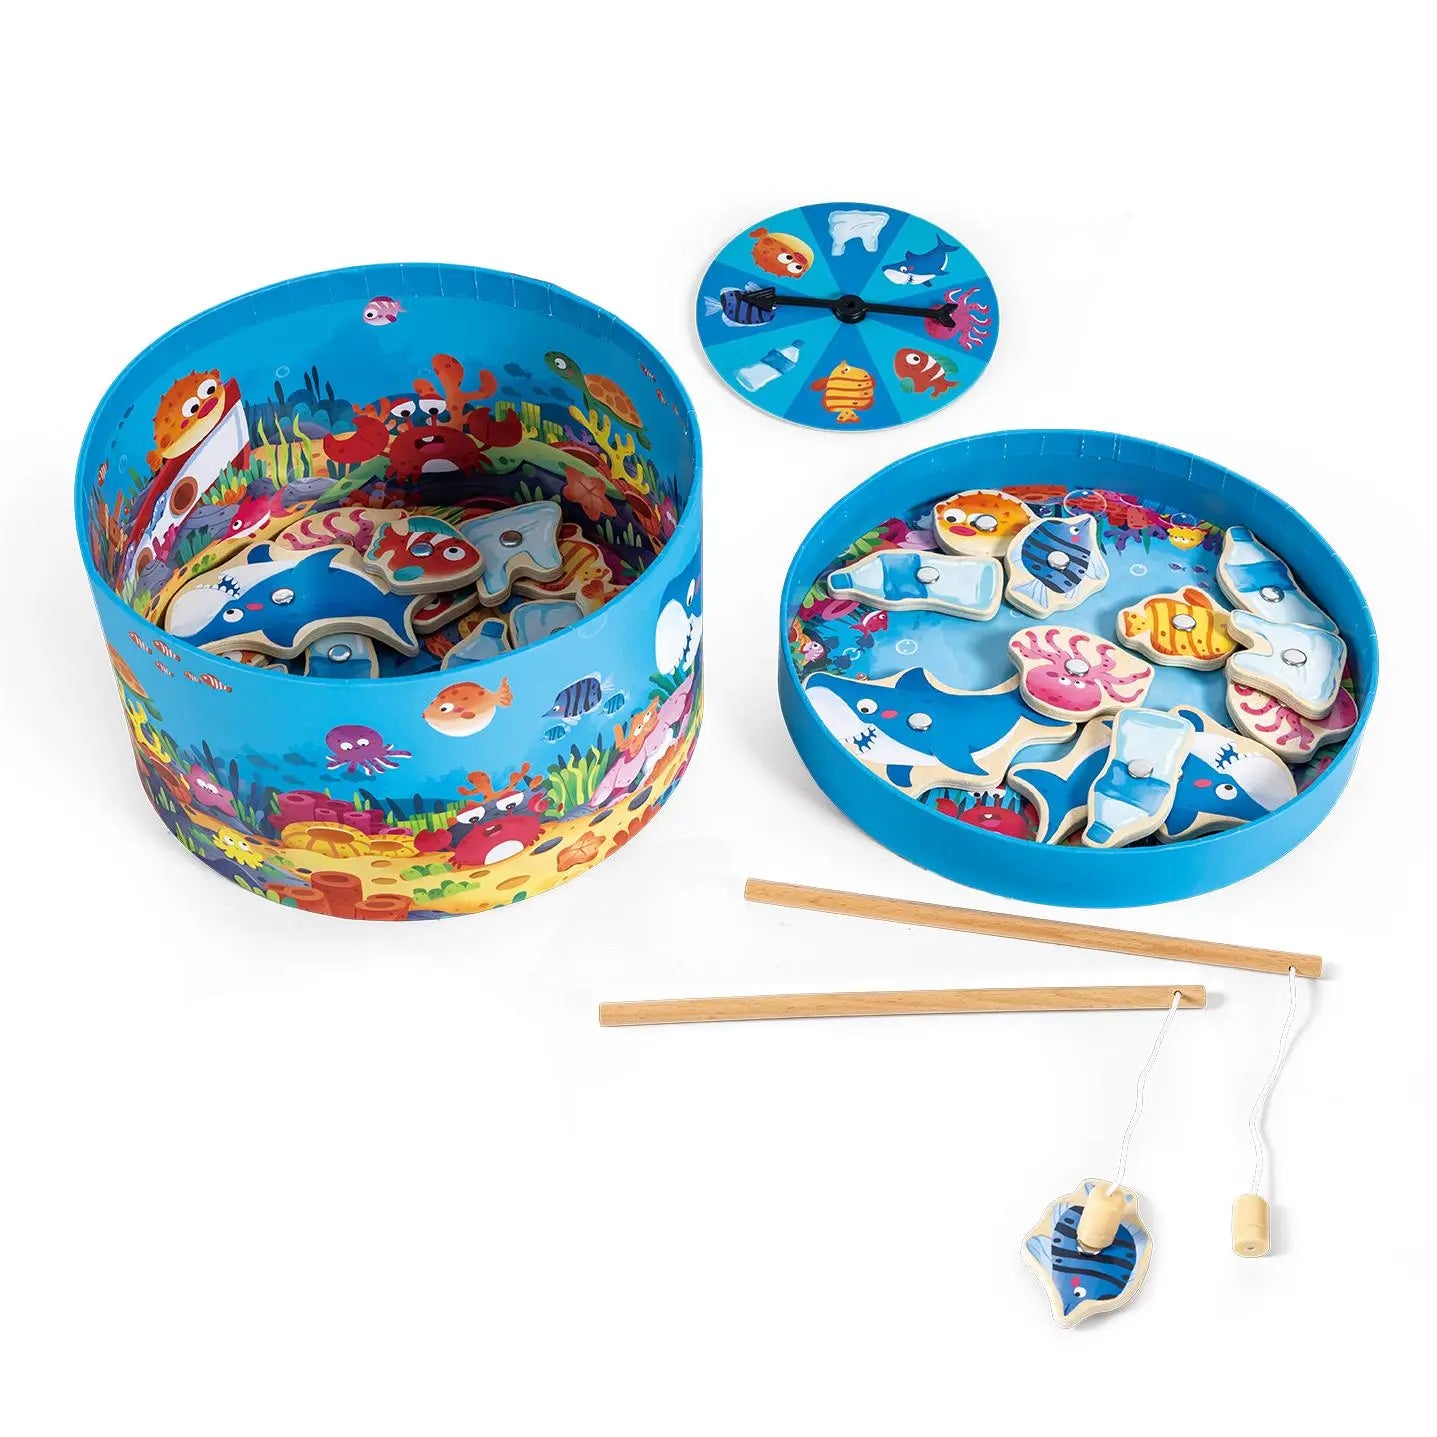  Small World Toys Magnetic Fishing Game, Catch of The